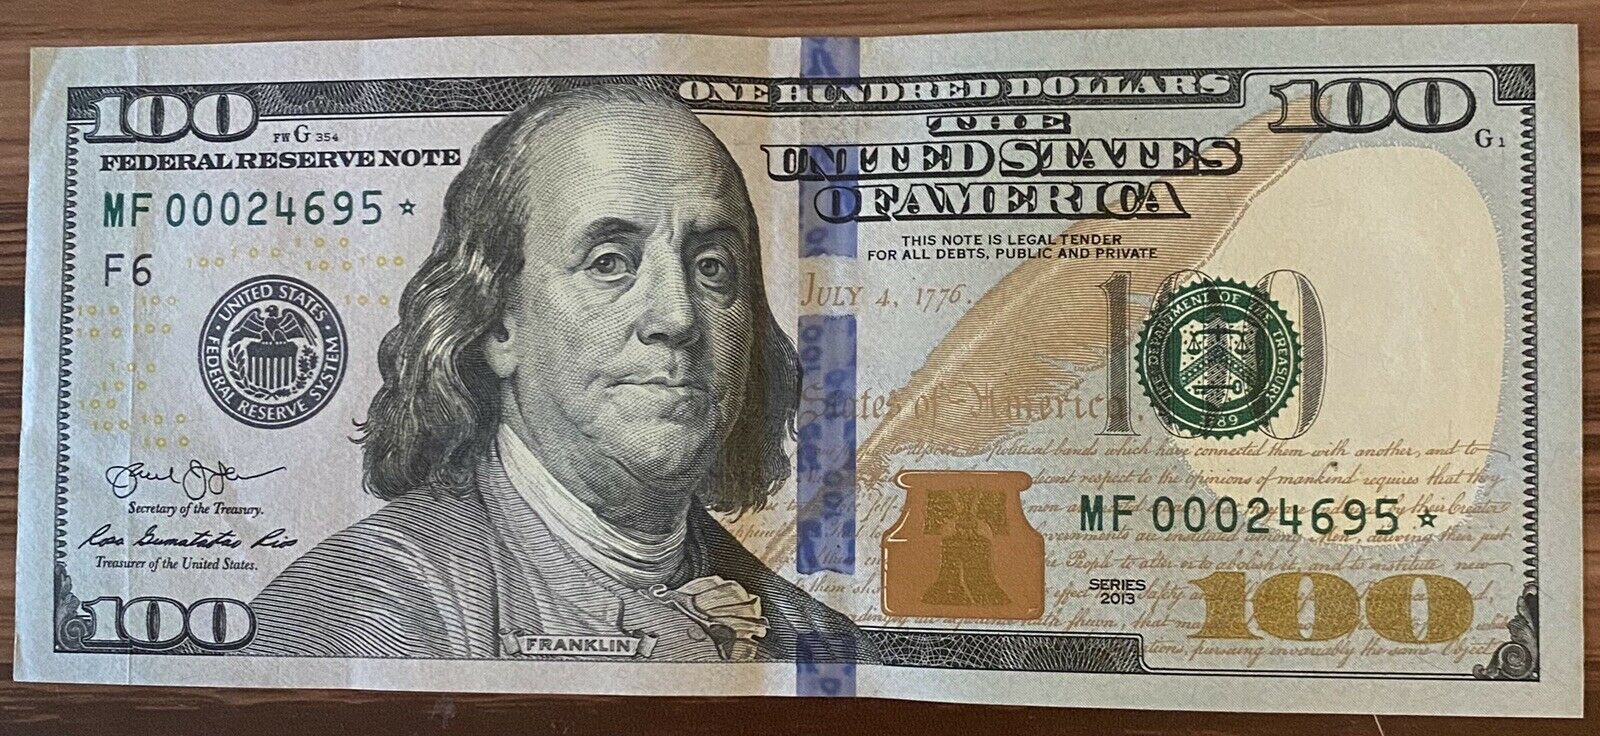 2013 $100 Federal Reserve ✯ Star Note  Mf00024695* Very Rare Only 128k Run